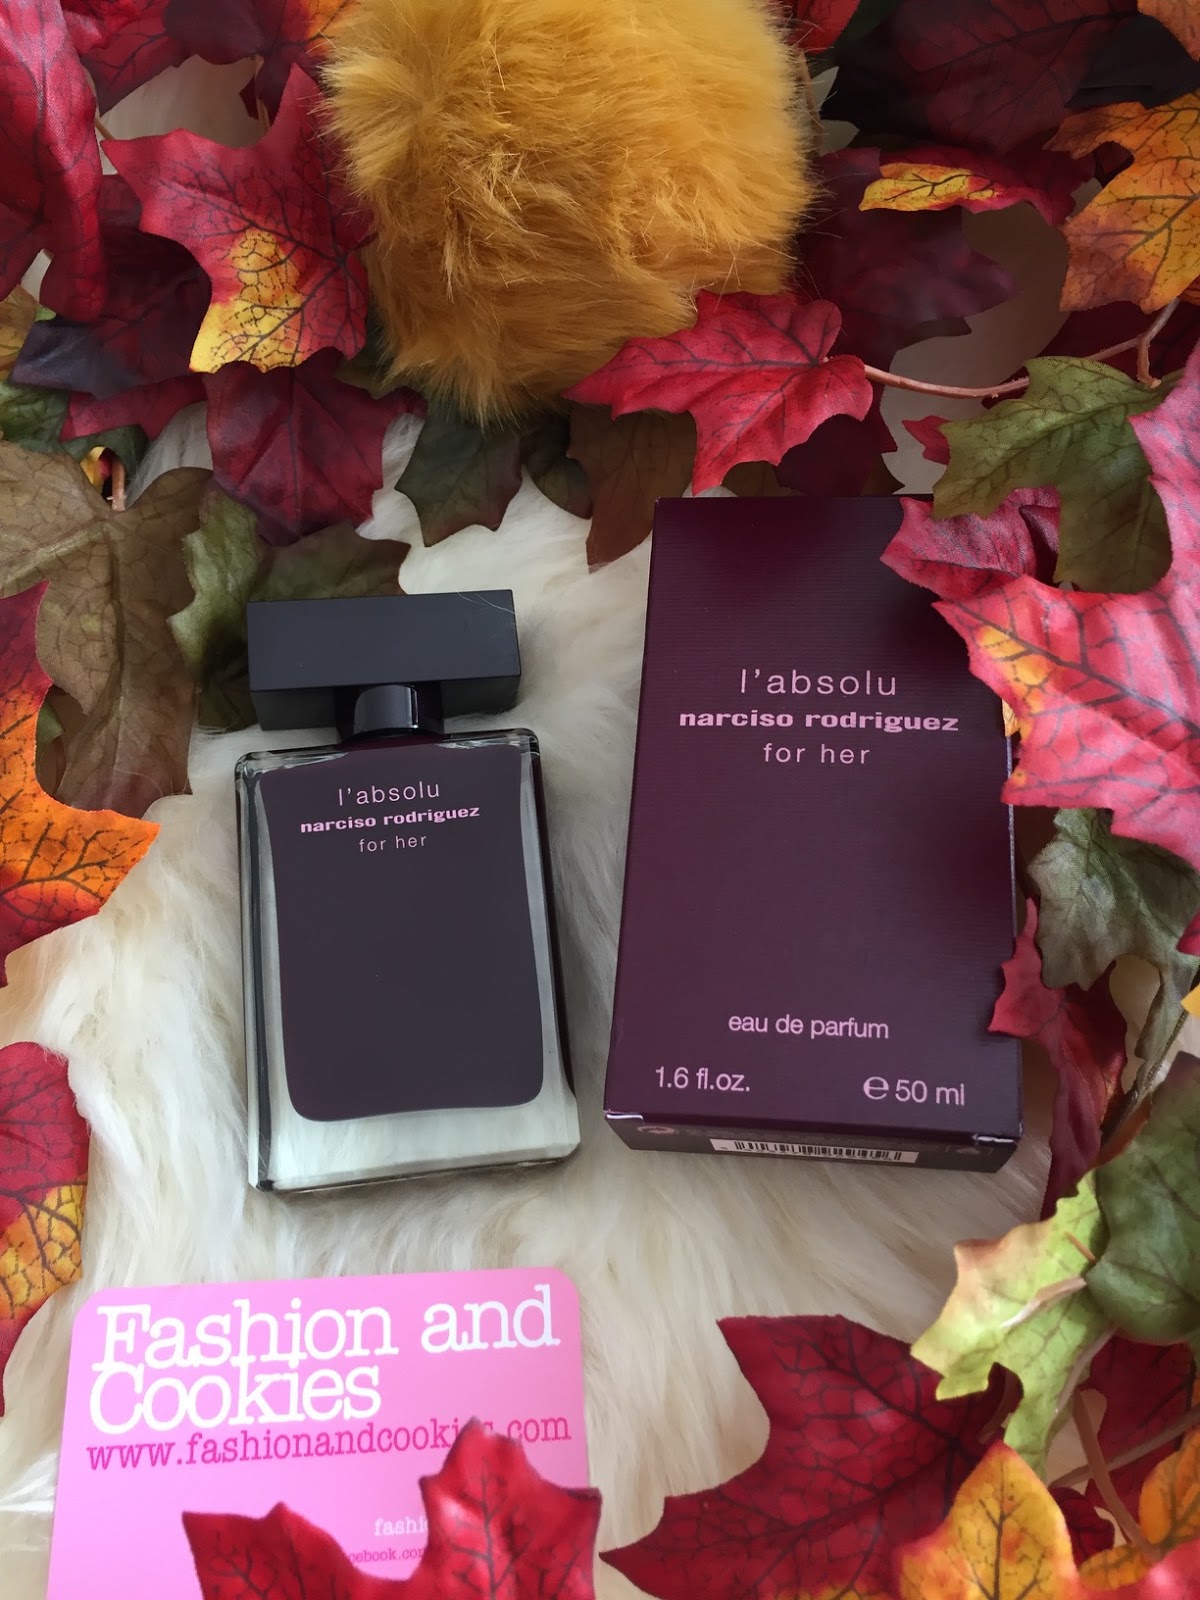 Narciso Rodriguez for her l'absolu eau de parfum on Fashion and Cookies fashion and beauty blog